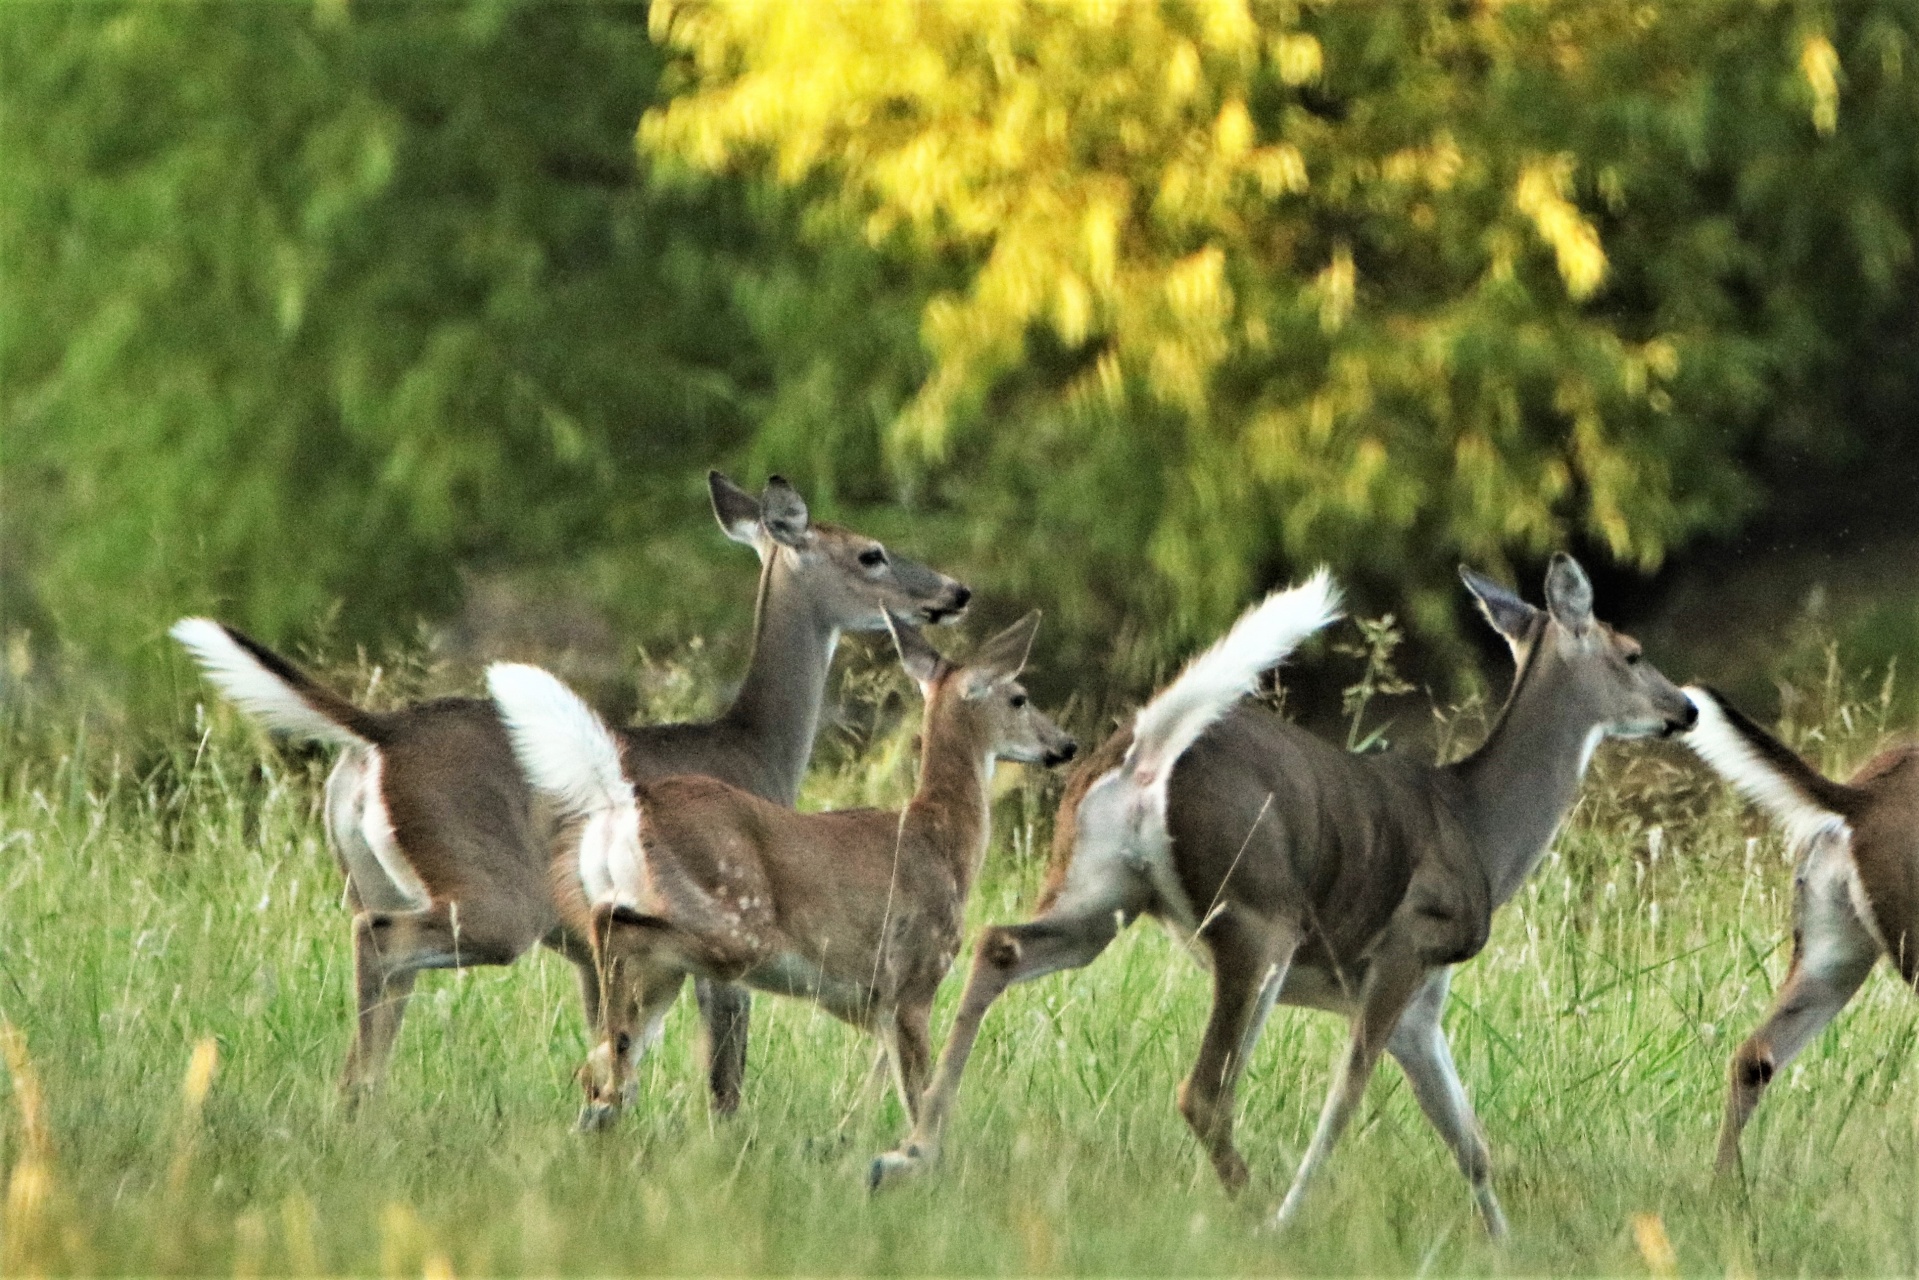 A small group of white-tail deer, running away from the camera, showing their white tails up in the air.